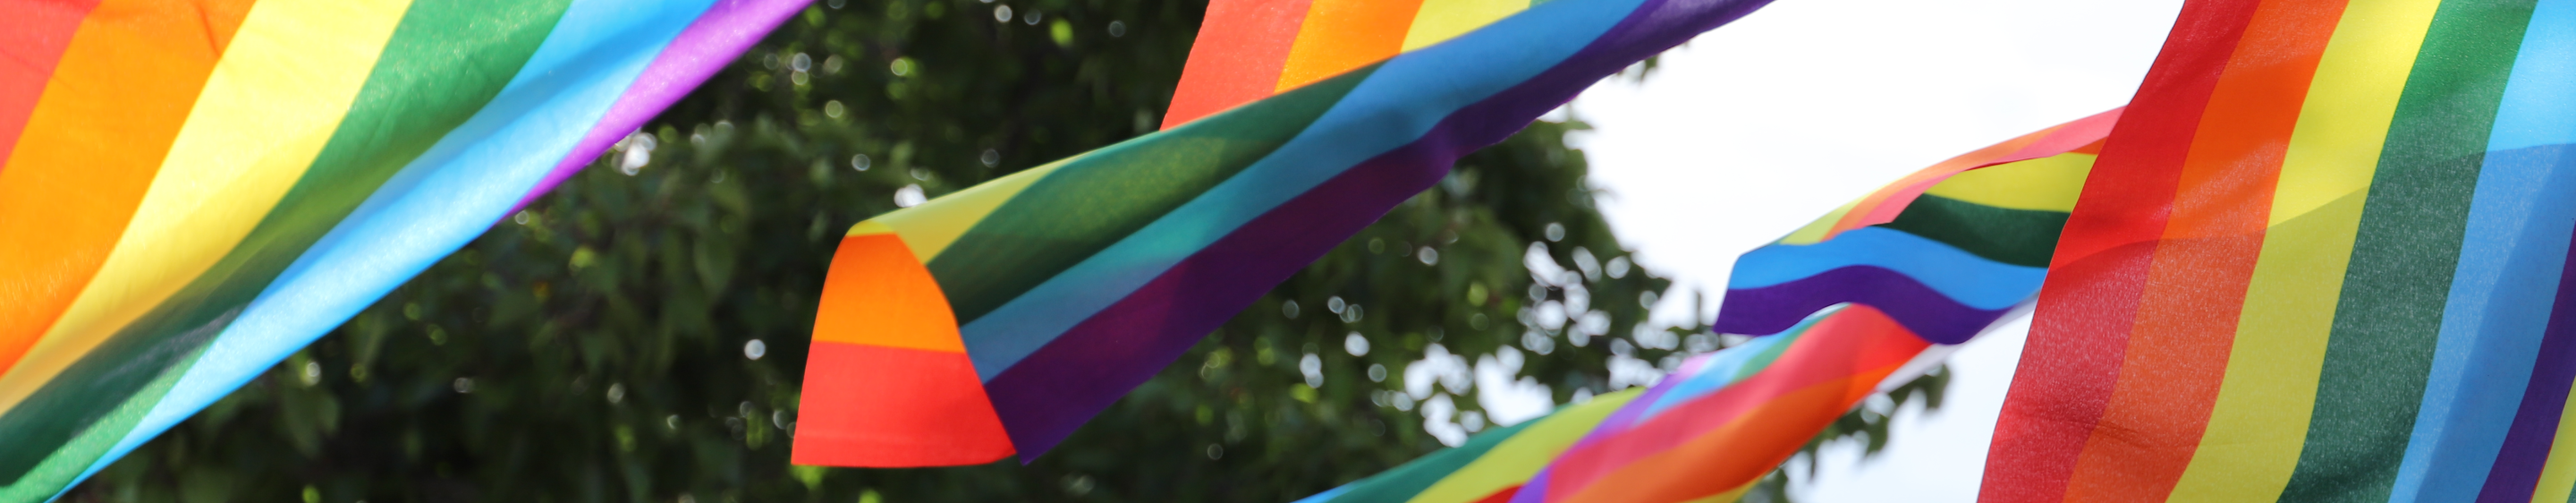 Banner image of multiple rainbow flag bunting